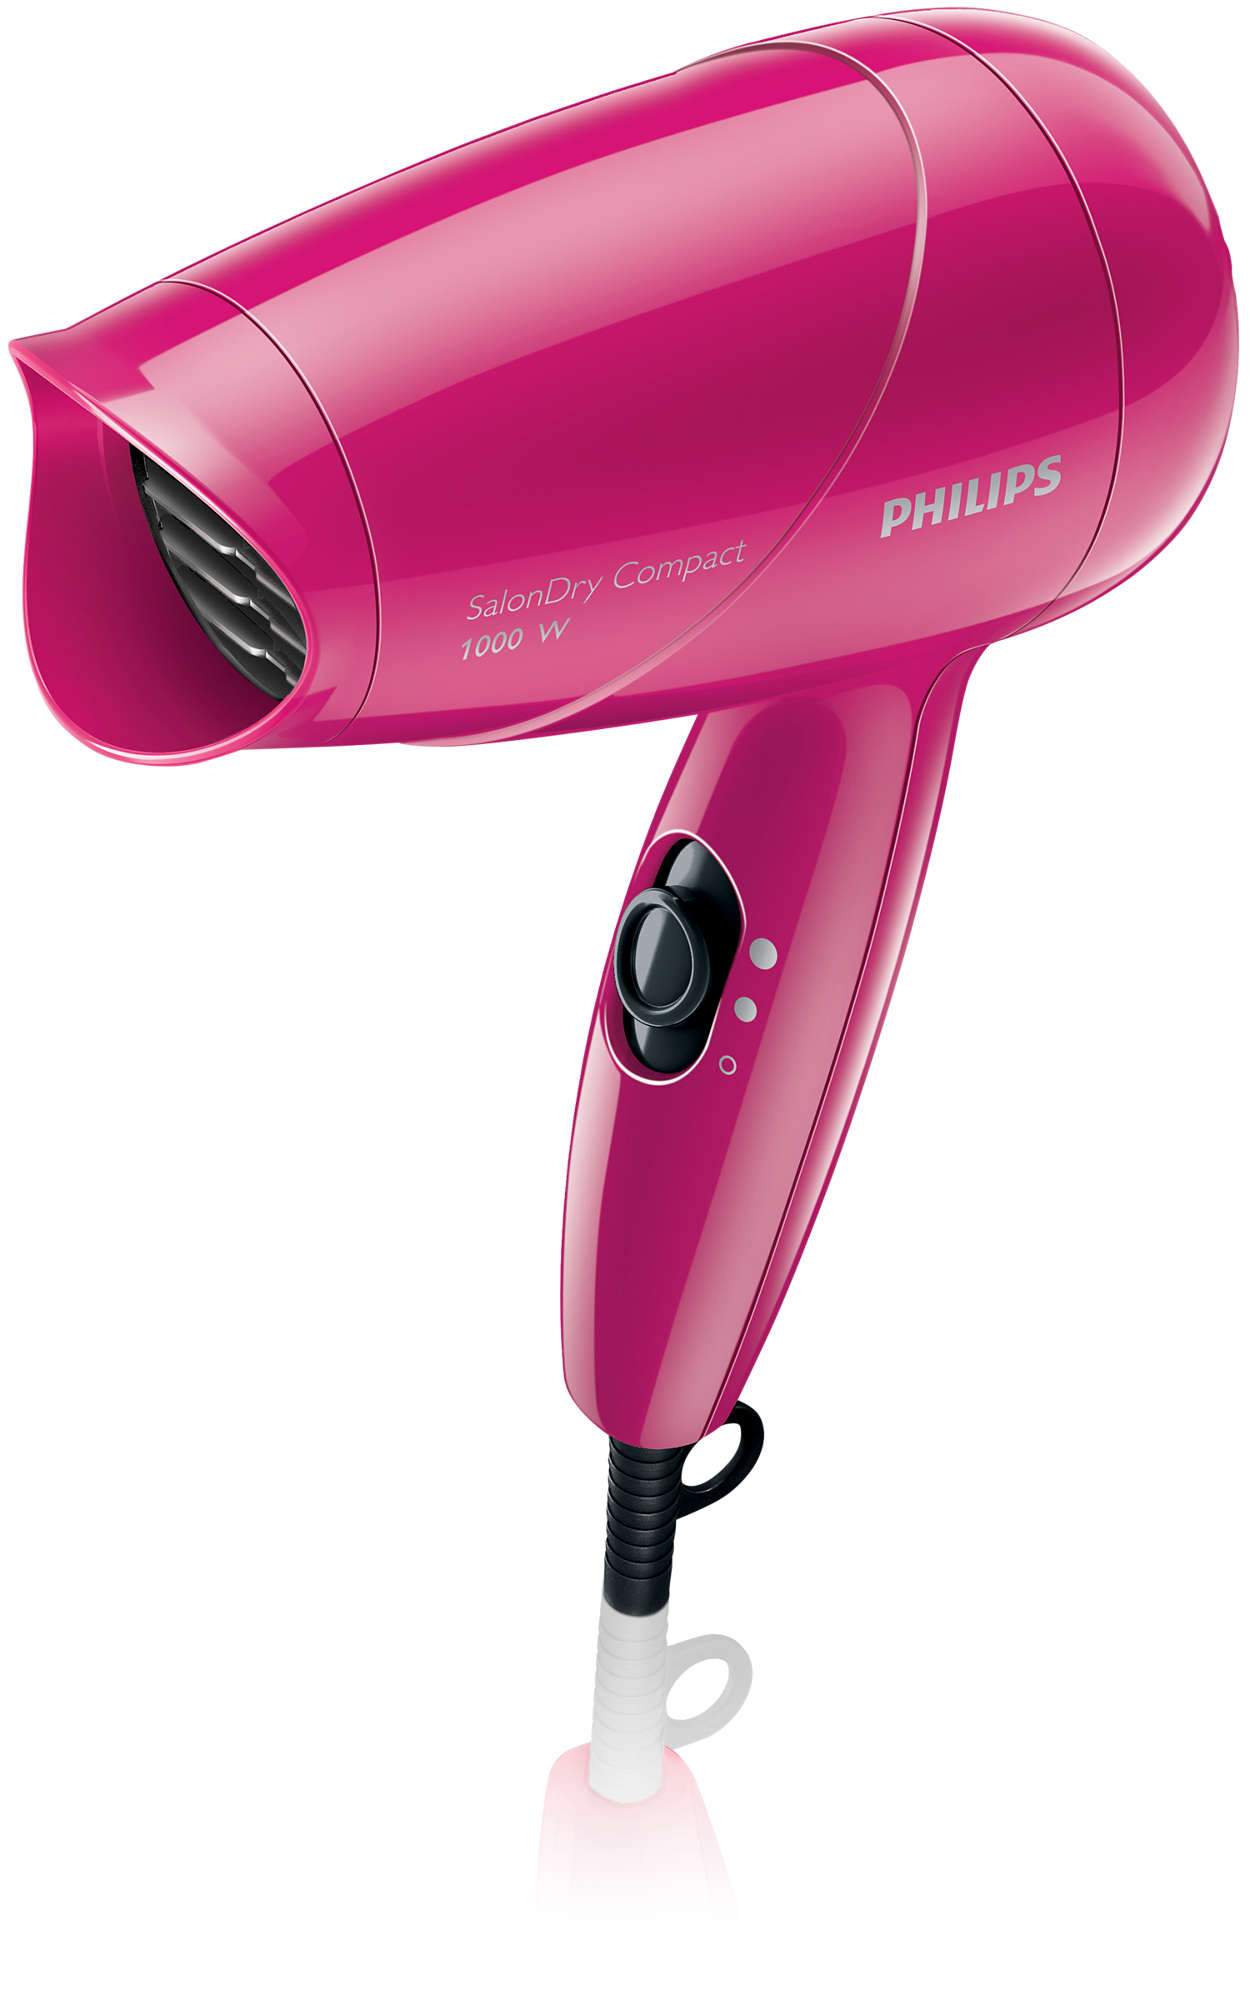 PHILIPS SALON DRY COMPACT HP8141/00 HAIR DRYER (PINK)